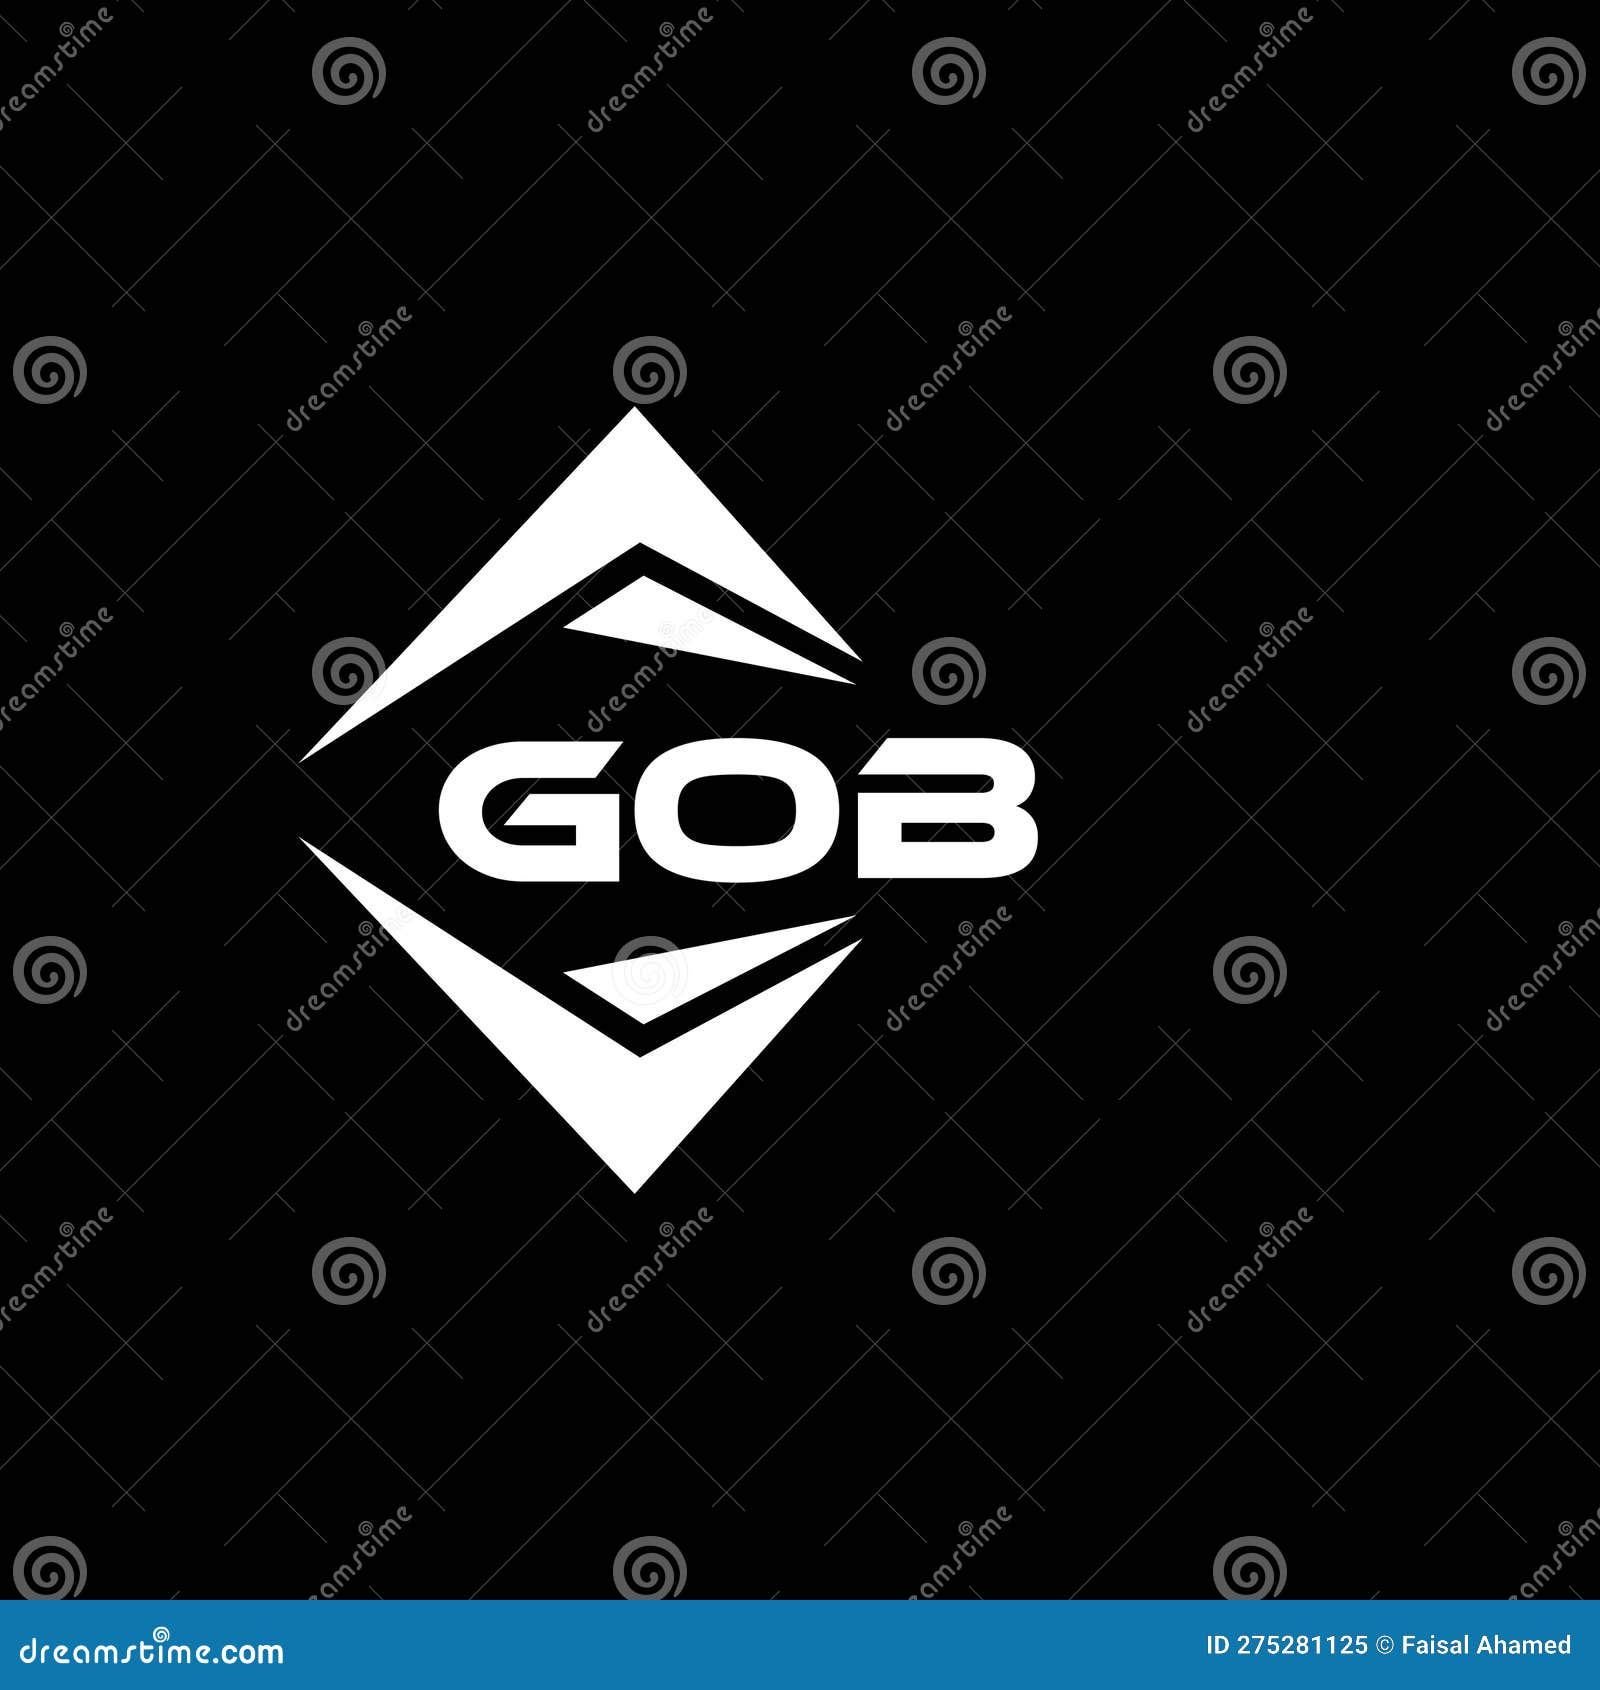 gob abstract technology logo  on black background. gob creative initials letter logo concept